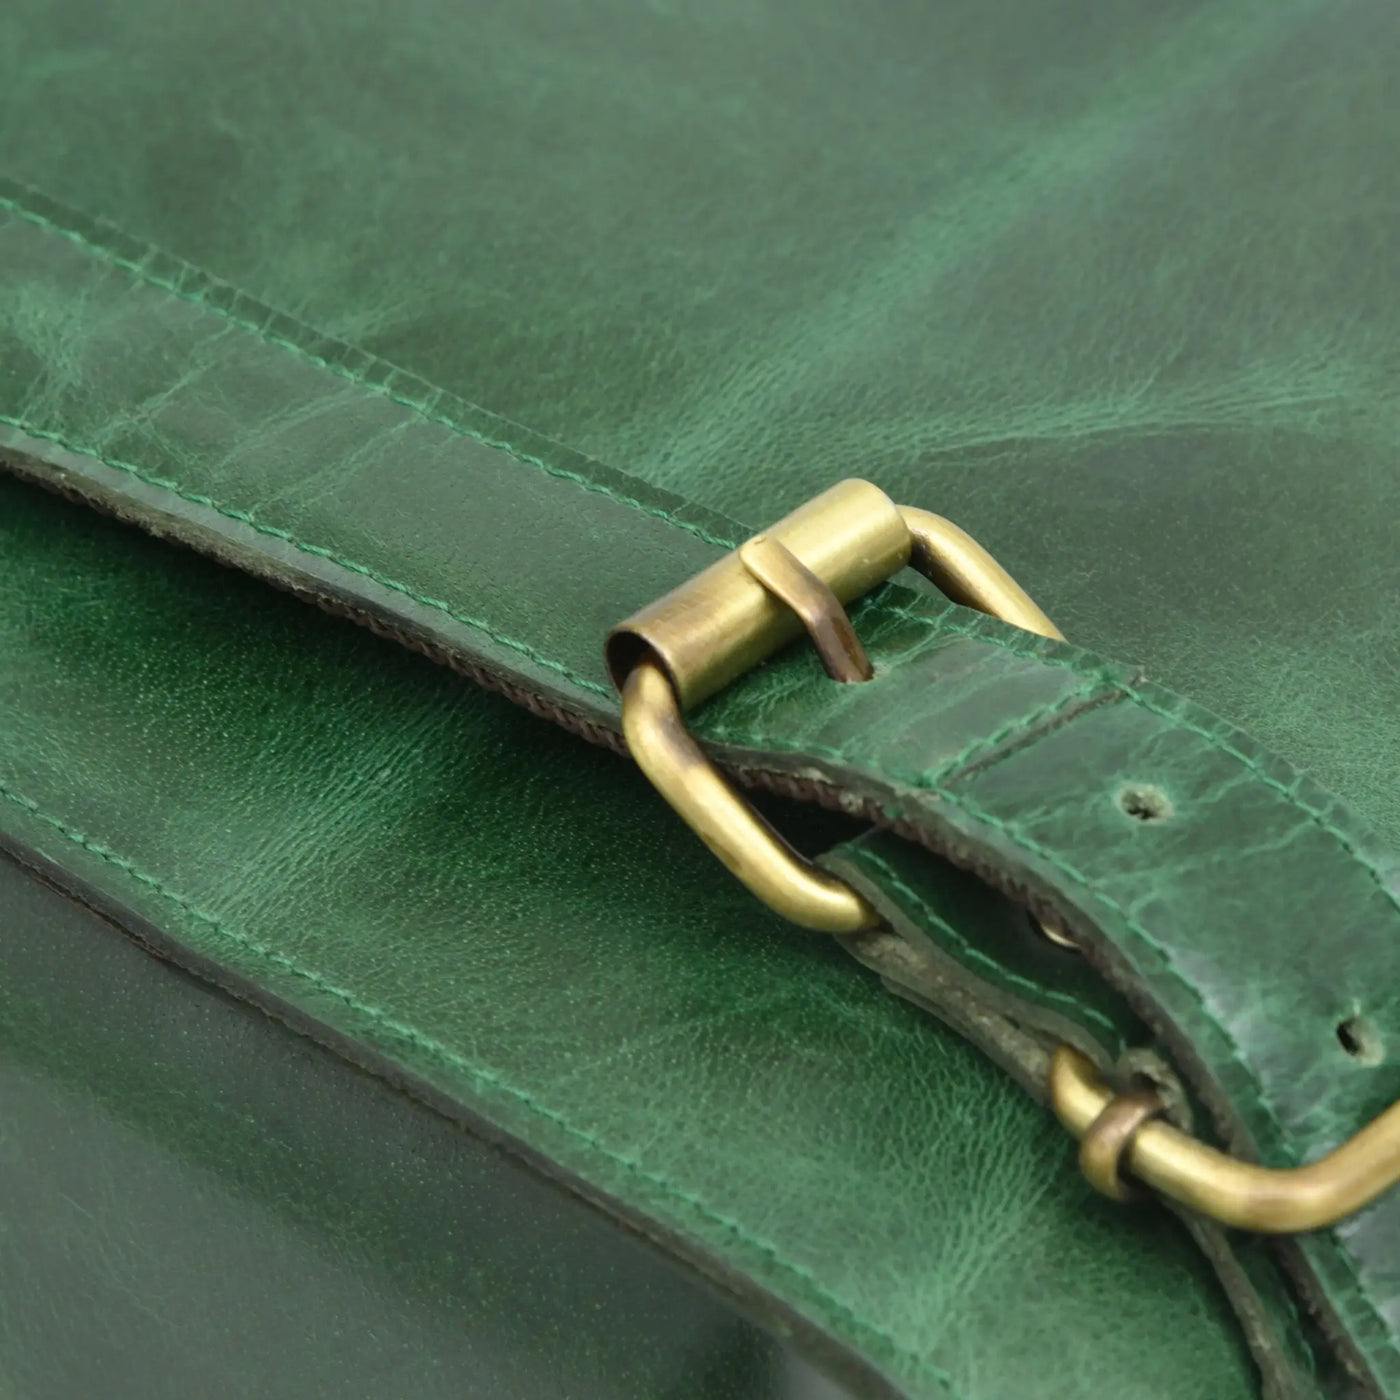 Jay Rucksack emerald marble green leather